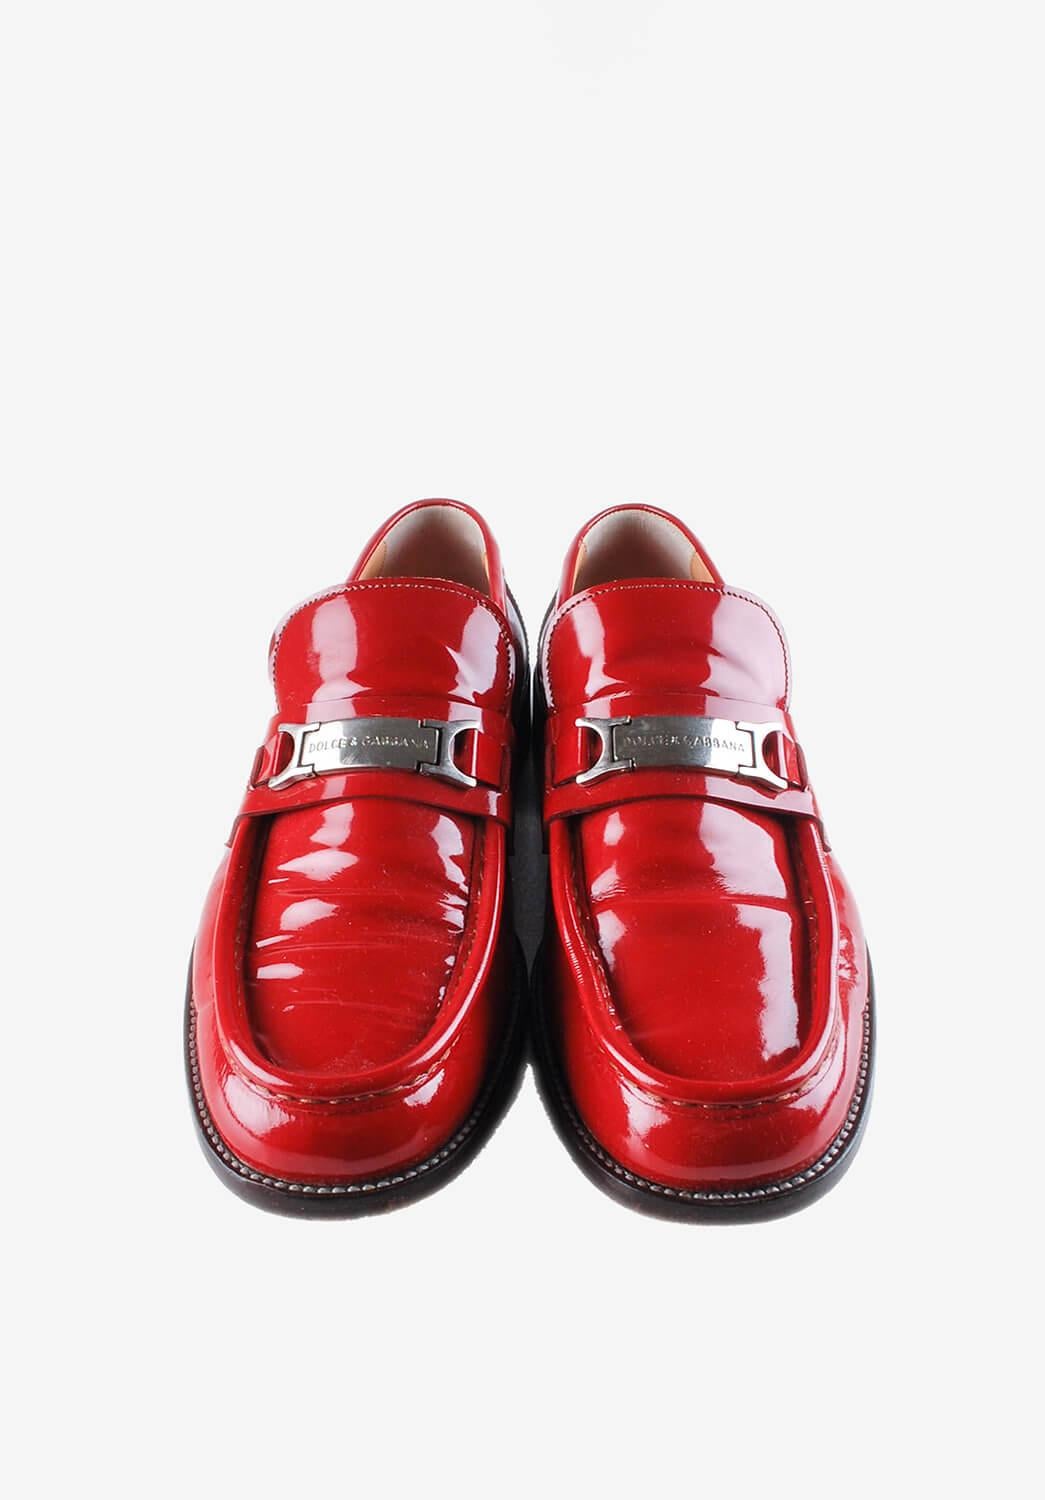 100% genuine Dolce&Gabbana Vintage Flats
Color: Red
(An actual color may a bit vary due to individual computer screen interpretation)
Material: Patent Leather
Tag size: 8UK , USA9, EUR 43
These shoes are great quality item. Rate 9 of 10, excellent